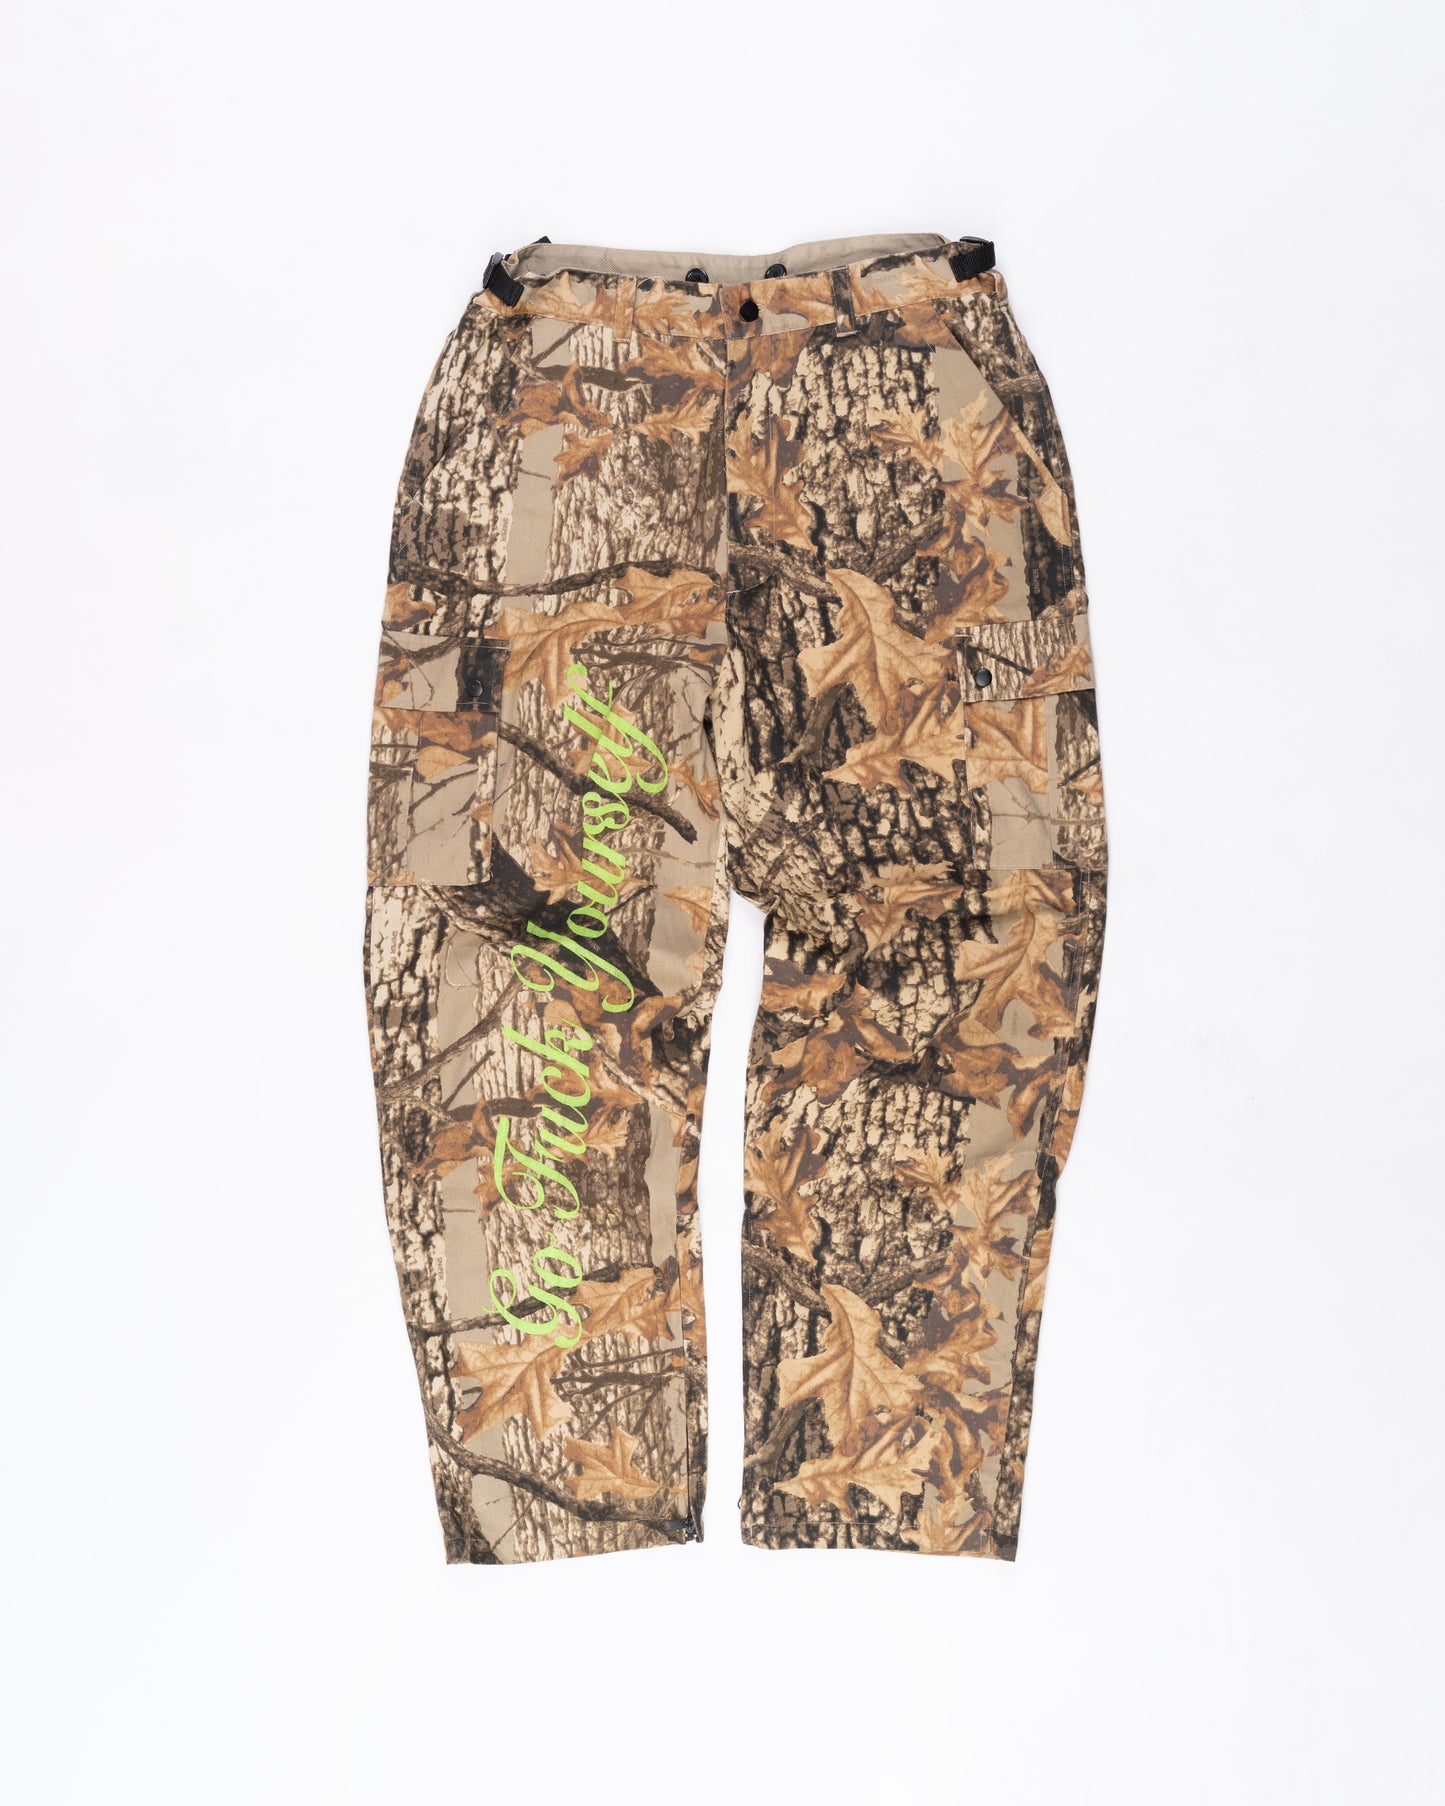 Real Tree Camo Pants Size: Large